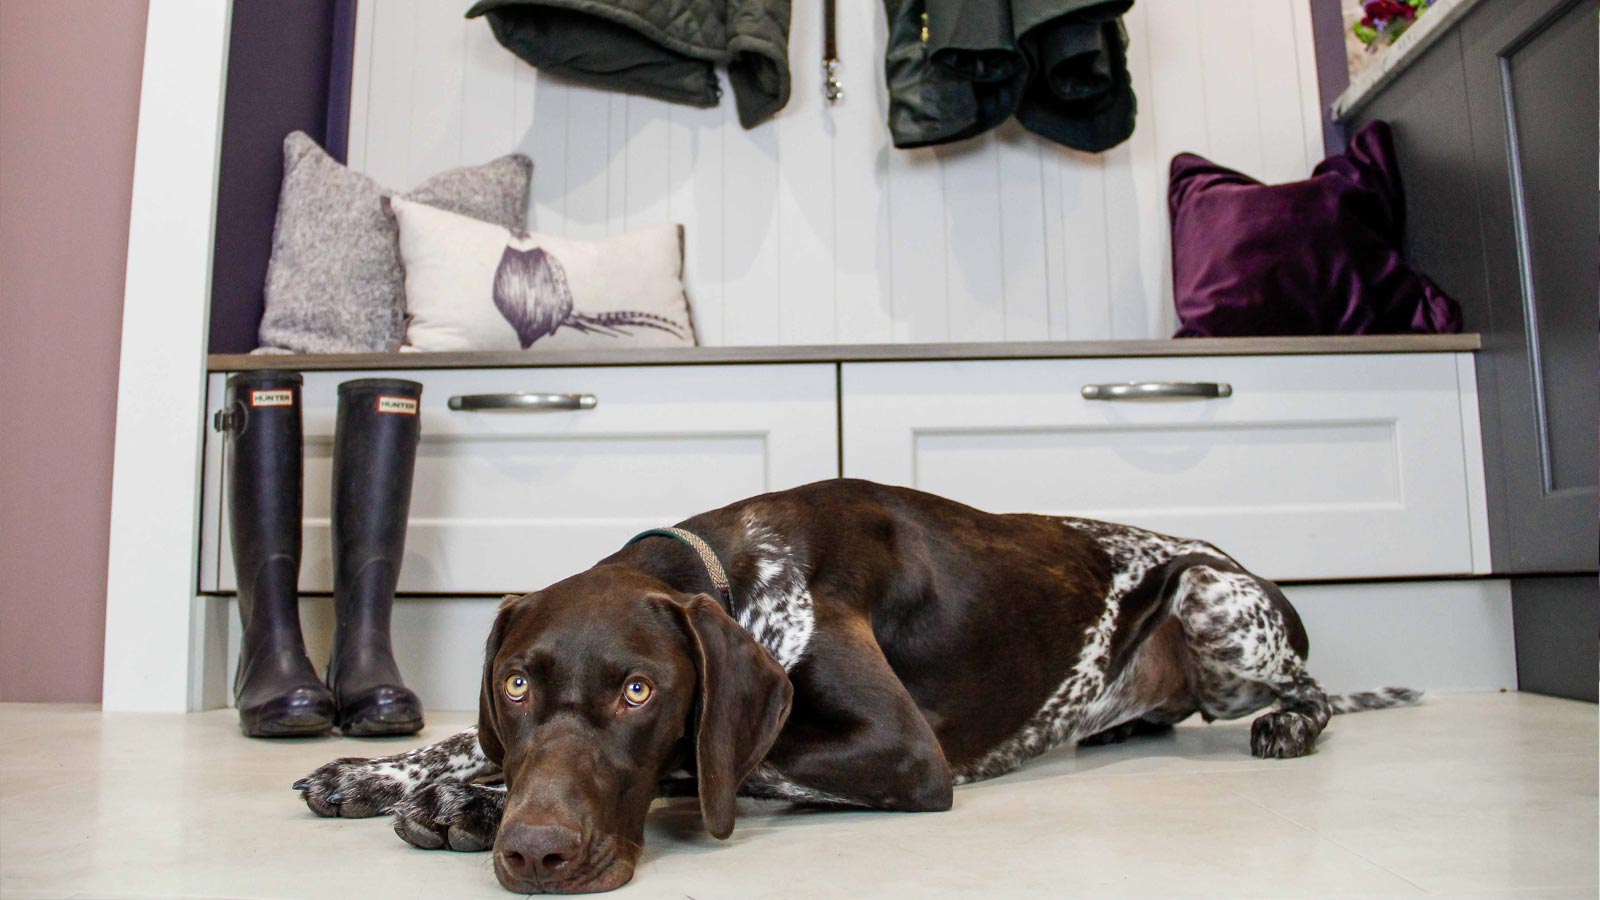 Boot room storage unit for high-end kitchen and laundry room owners alongside a dog